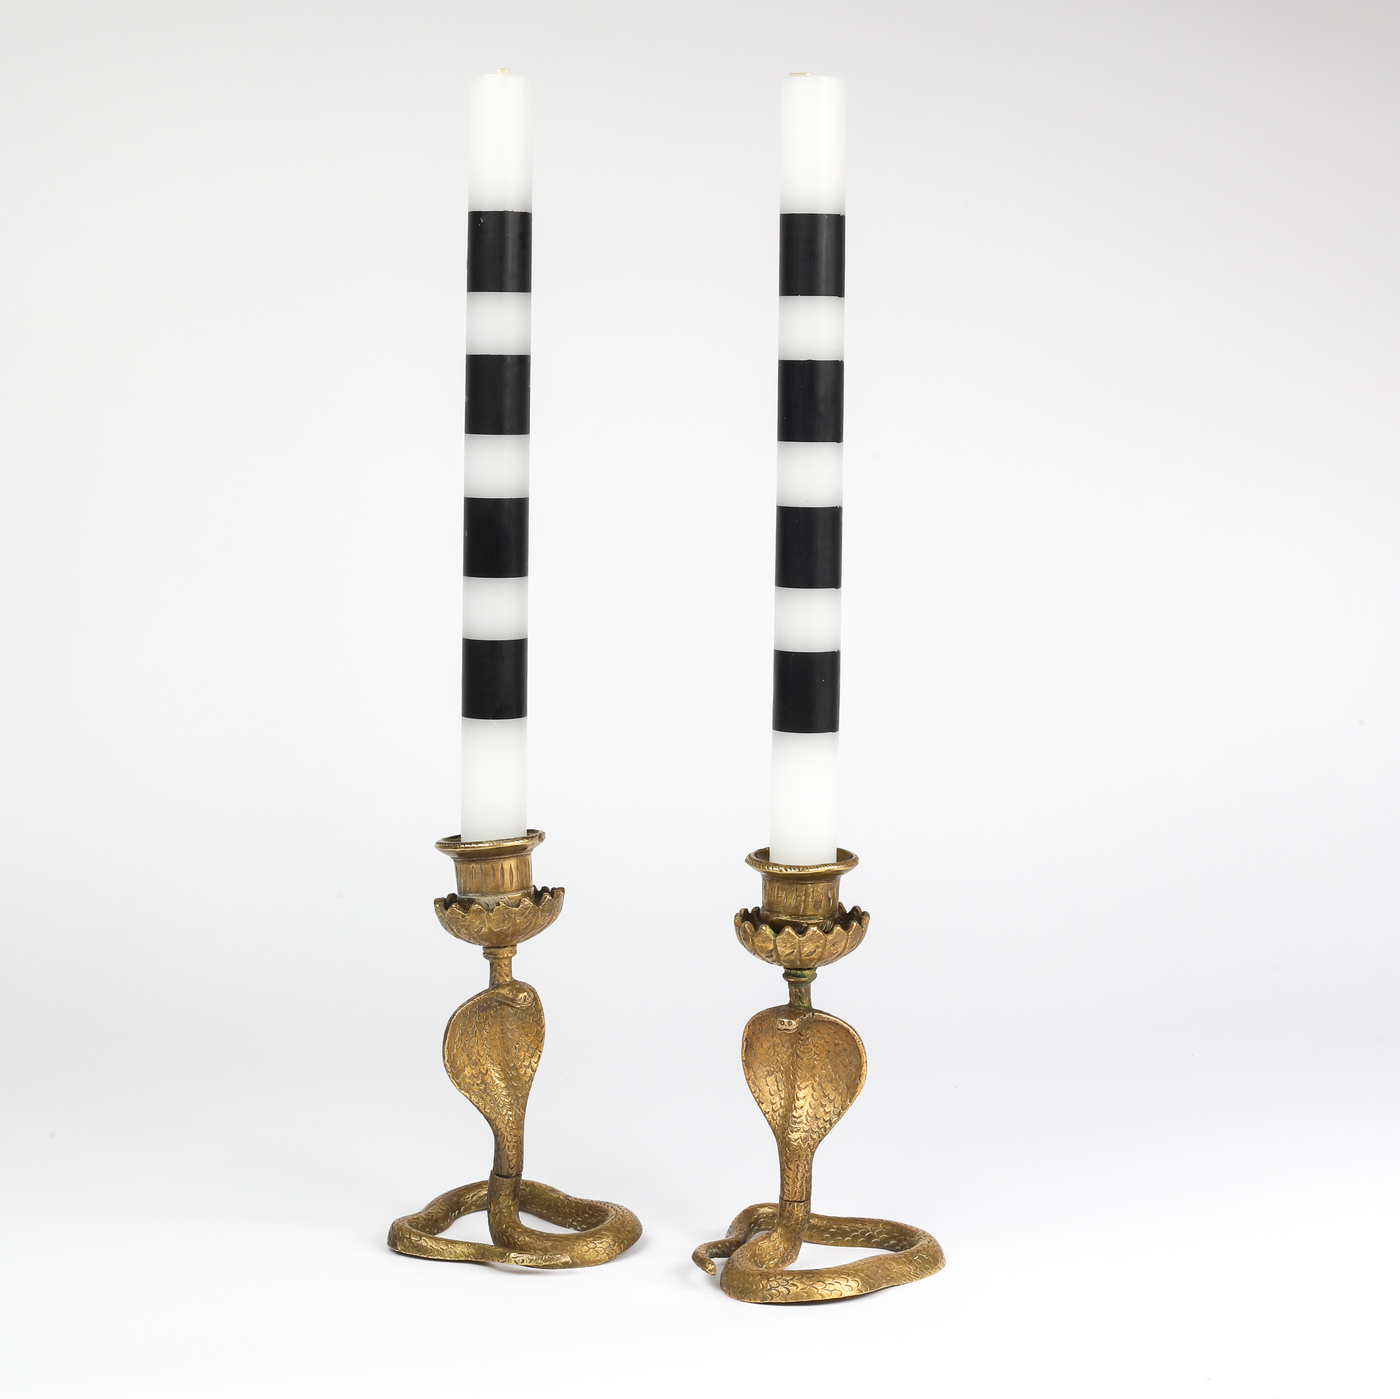 BRASS SERPENT CANDLEHOLDERS (sold out)